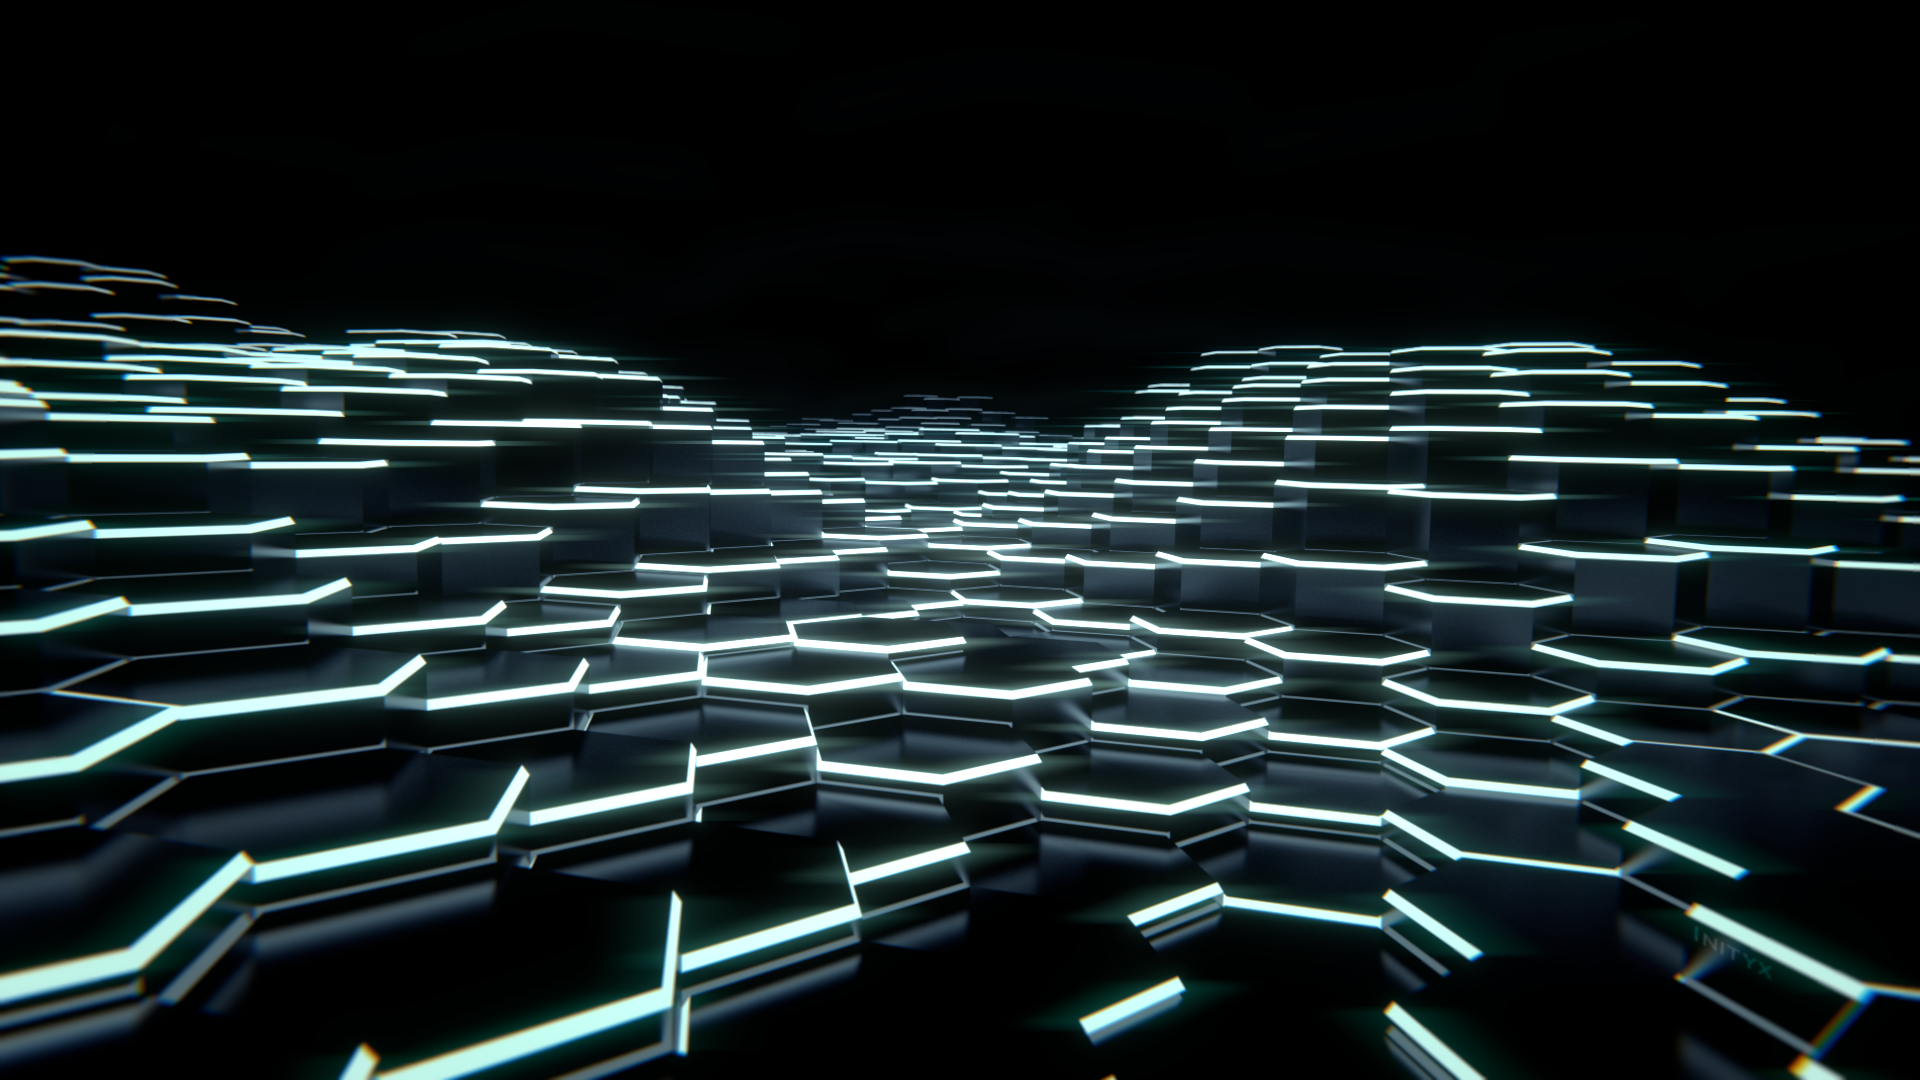 Tron: Legacy style wallpaper by Inityx on DeviantArt